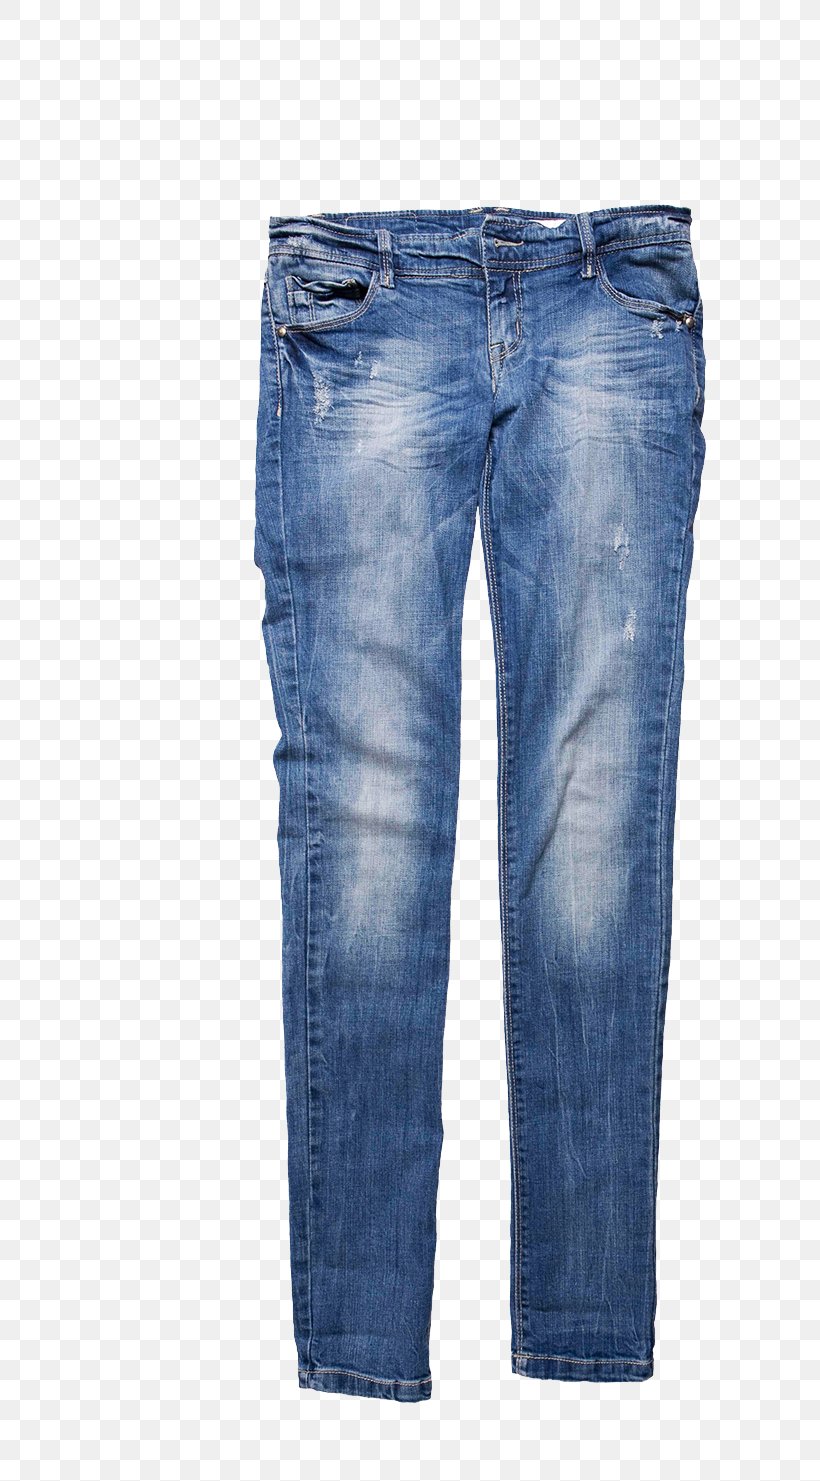 Jeans Denim Clothing Trousers Jacket, PNG, 637x1481px, Jeans, Clothing, Coat, Denim, Jacket Download Free